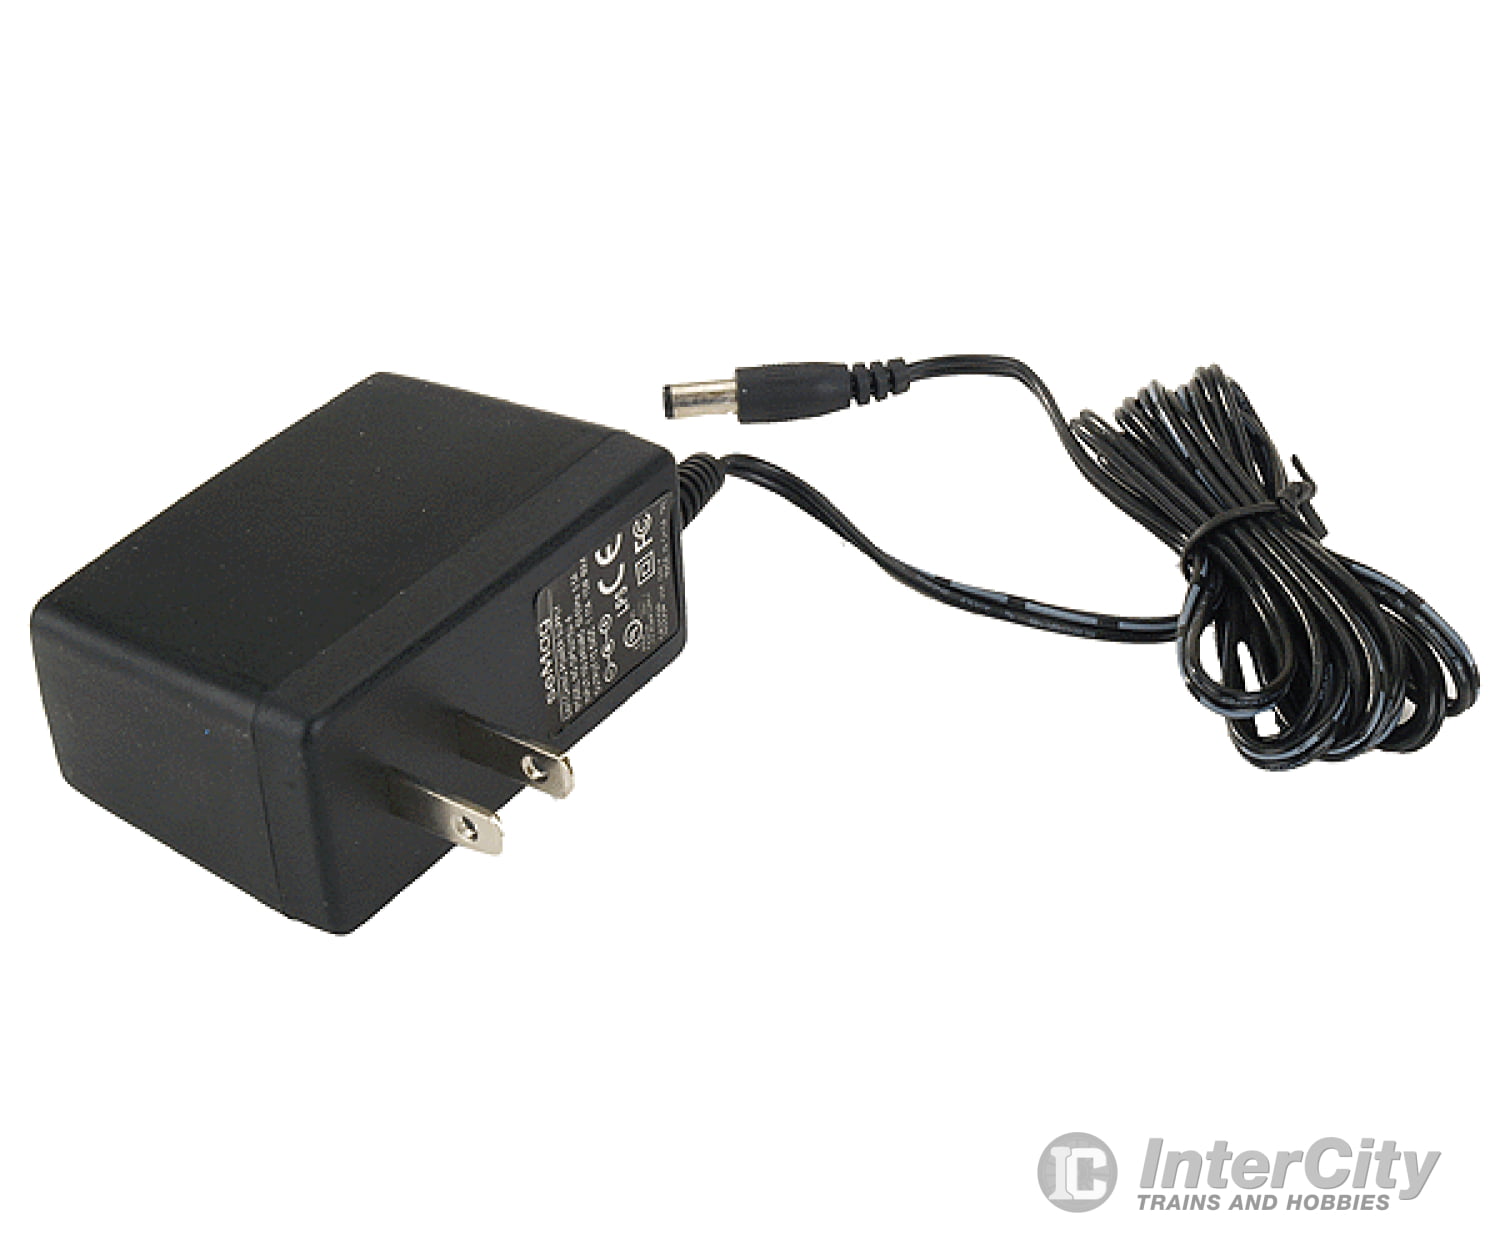 Nce 221 P114 - Power Supply For Cab #524-25 (Sold Separately) -- 13.8 Volts Dc 24 Watts Command